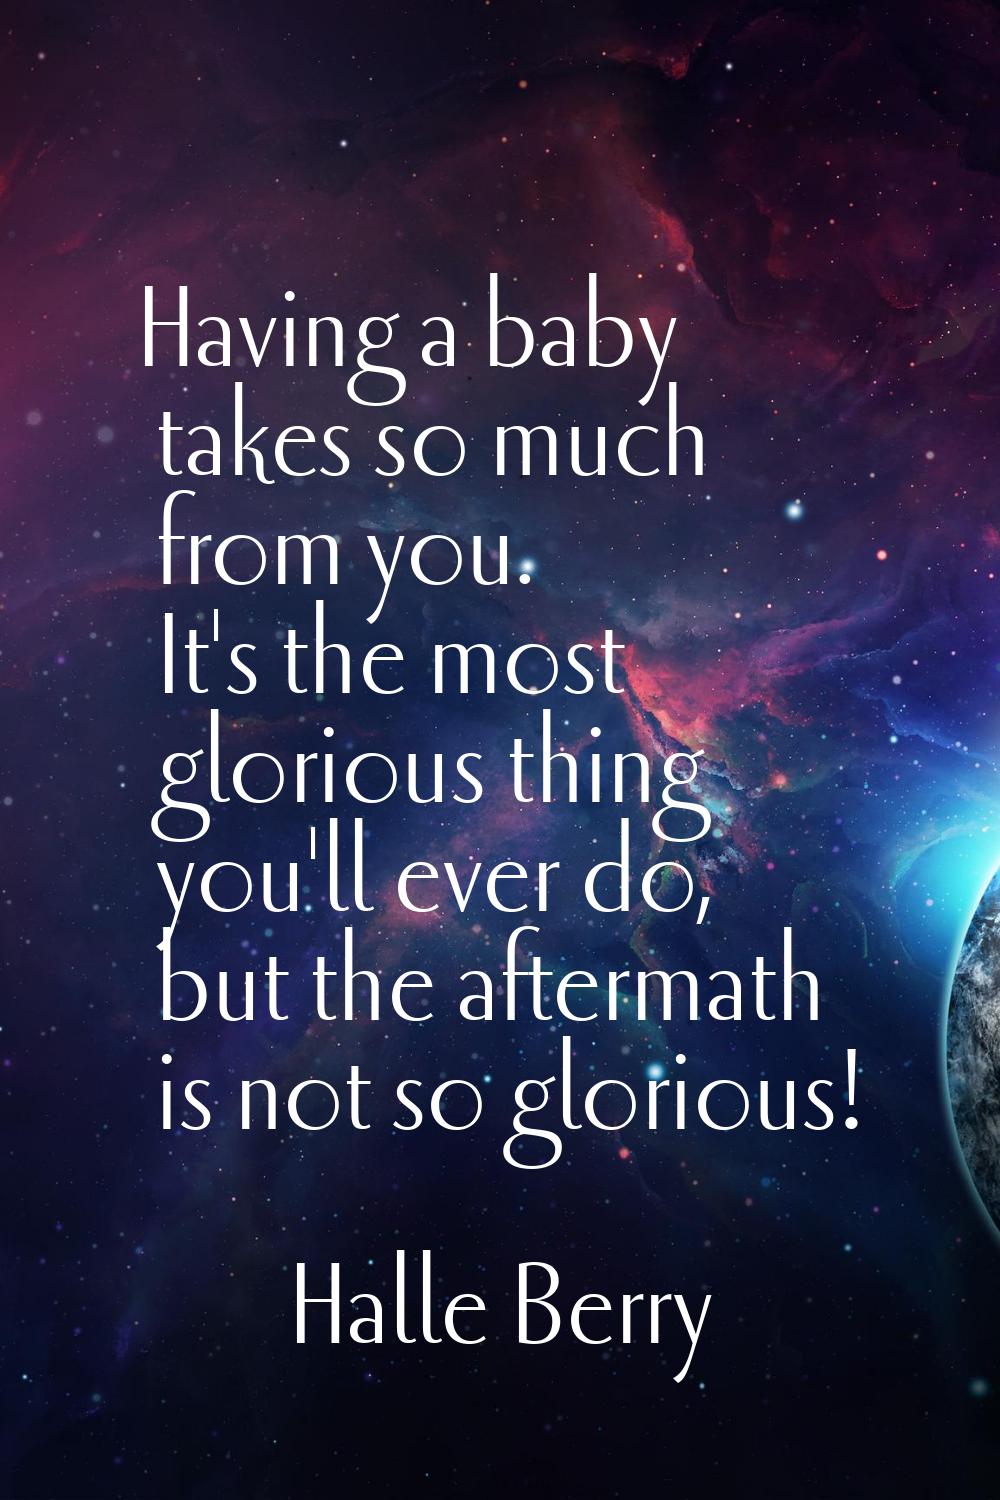 Having a baby takes so much from you. It's the most glorious thing you'll ever do, but the aftermat